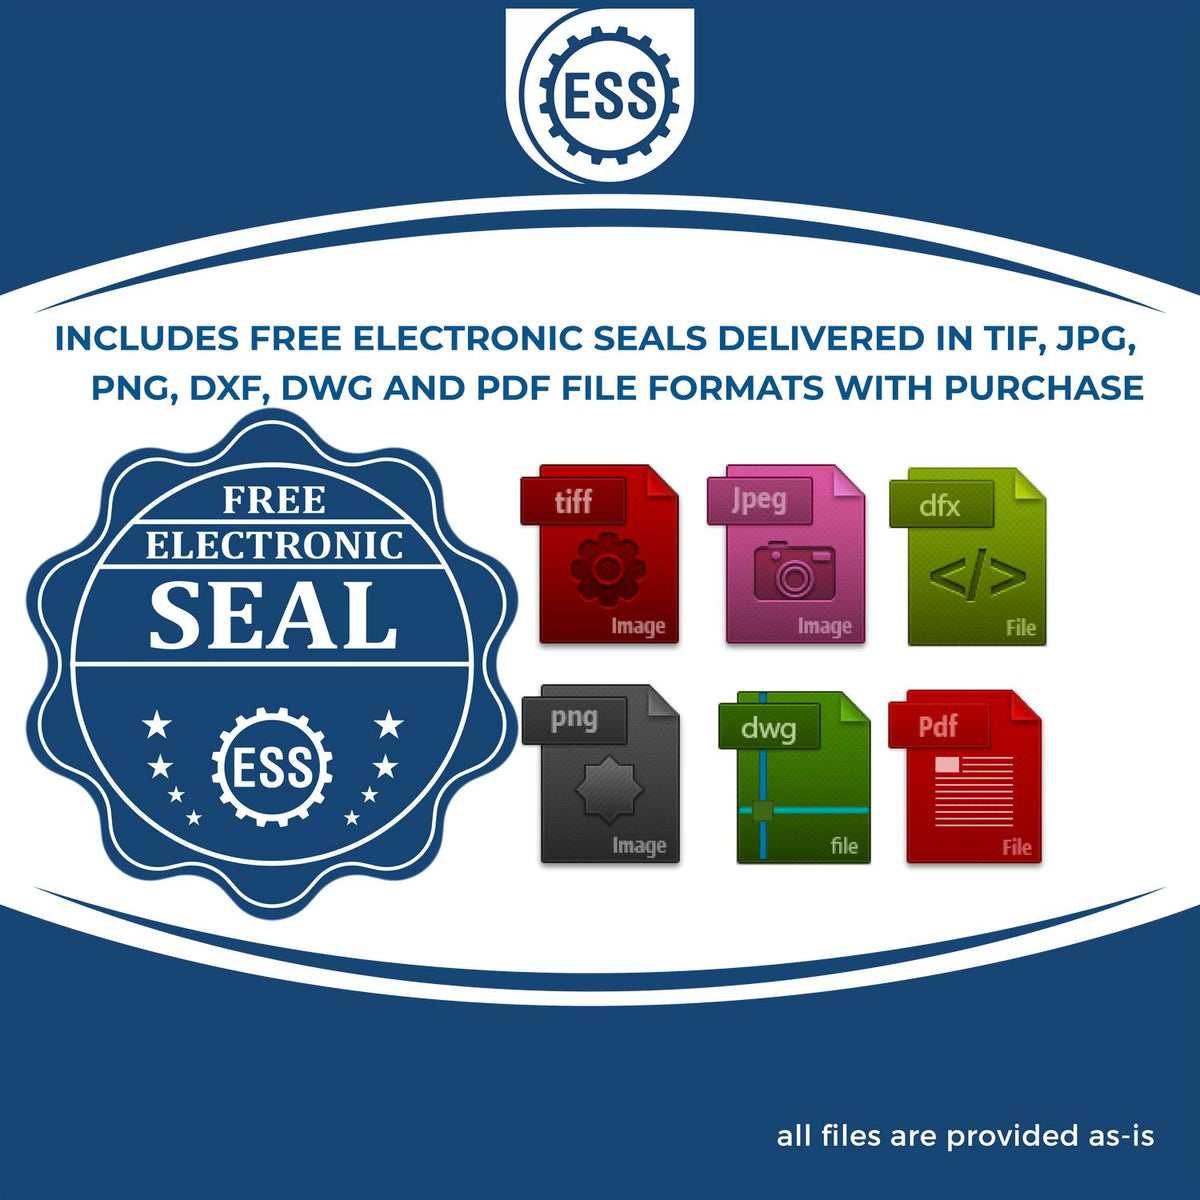 An infographic for the free electronic seal for the Slim Pre-Inked State Seal Notary Stamp for New Hampshire illustrating the different file type icons such as DXF, DWG, TIF, JPG and PNG.